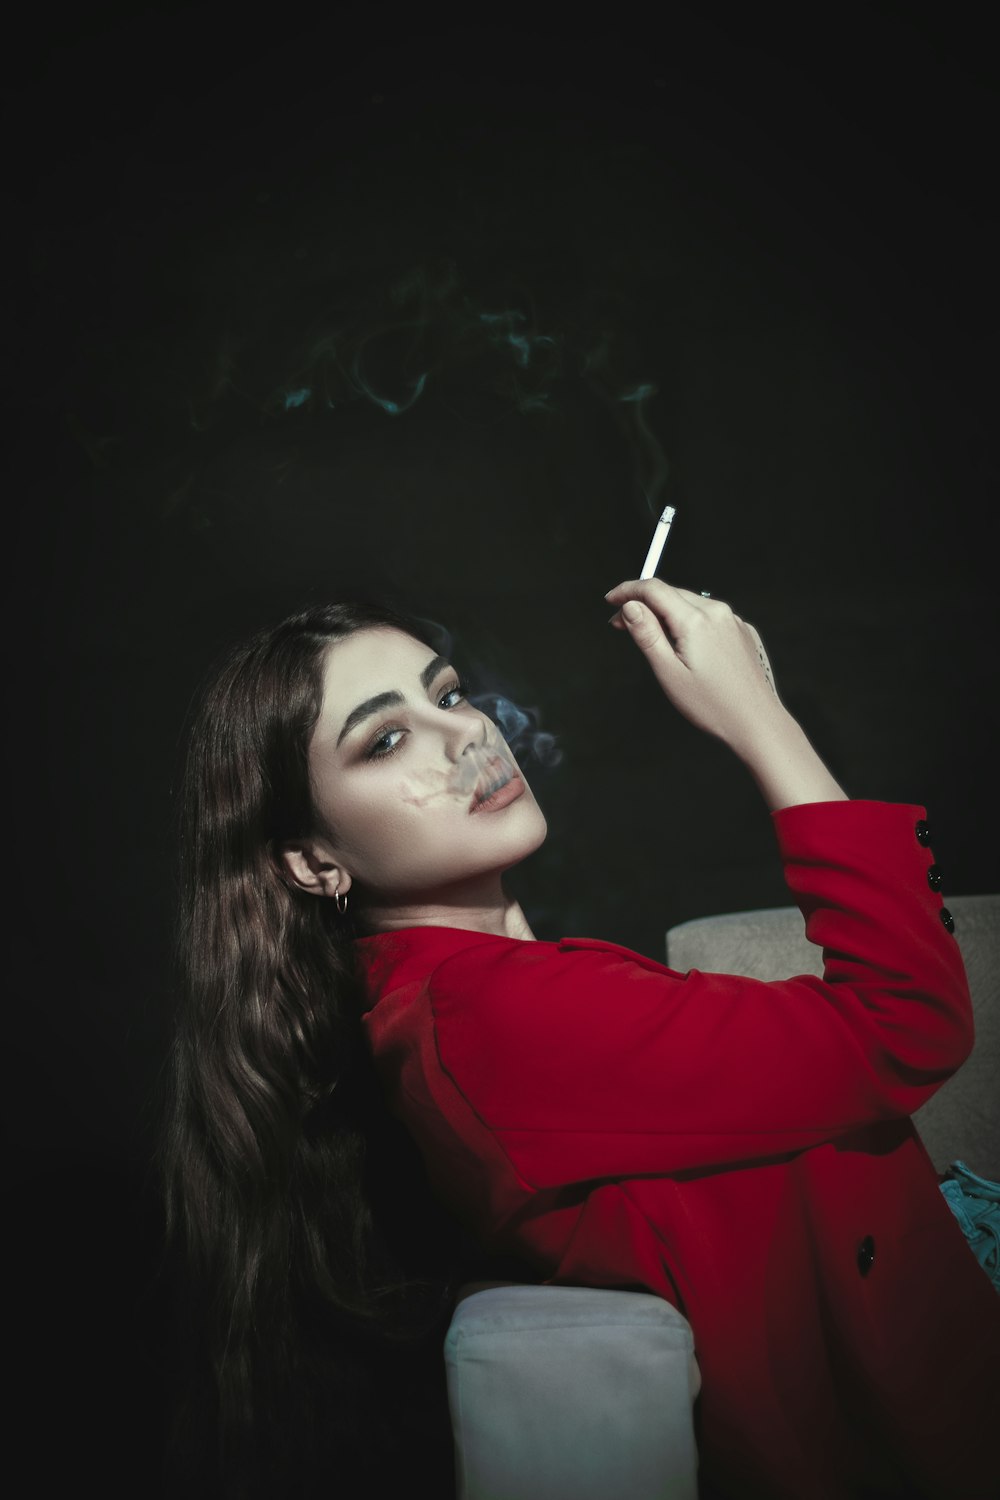 a woman in a red shirt smoking a cigarette